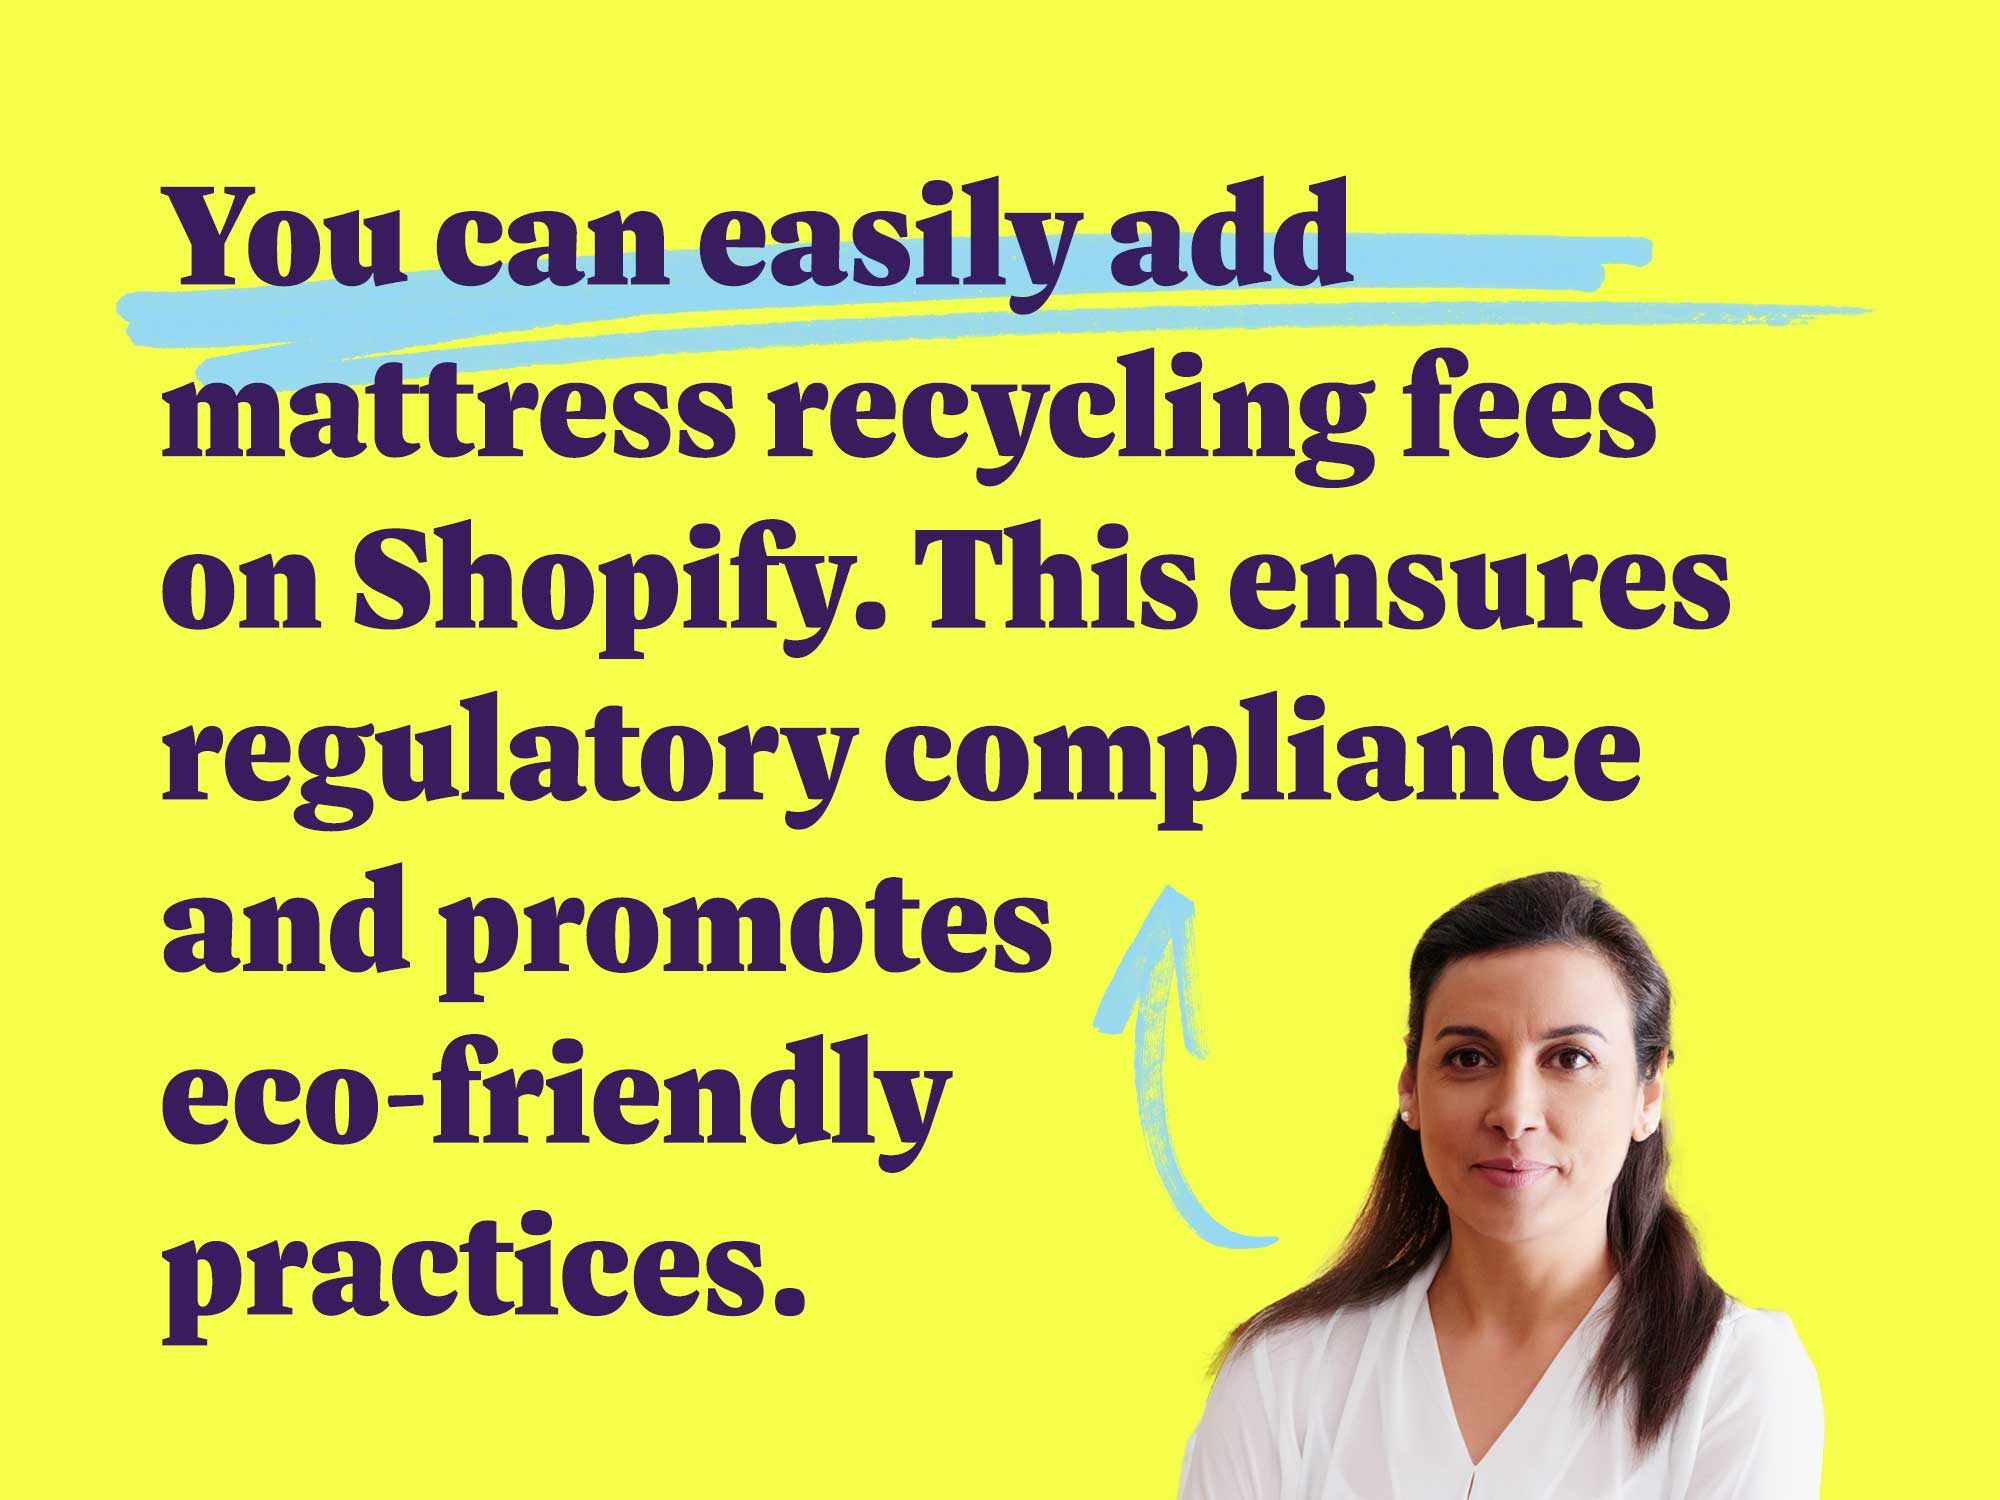 You can easily add mattress recycling fees on Shopify. This ensures regulatory compliance and promotes eco-friendly practices.